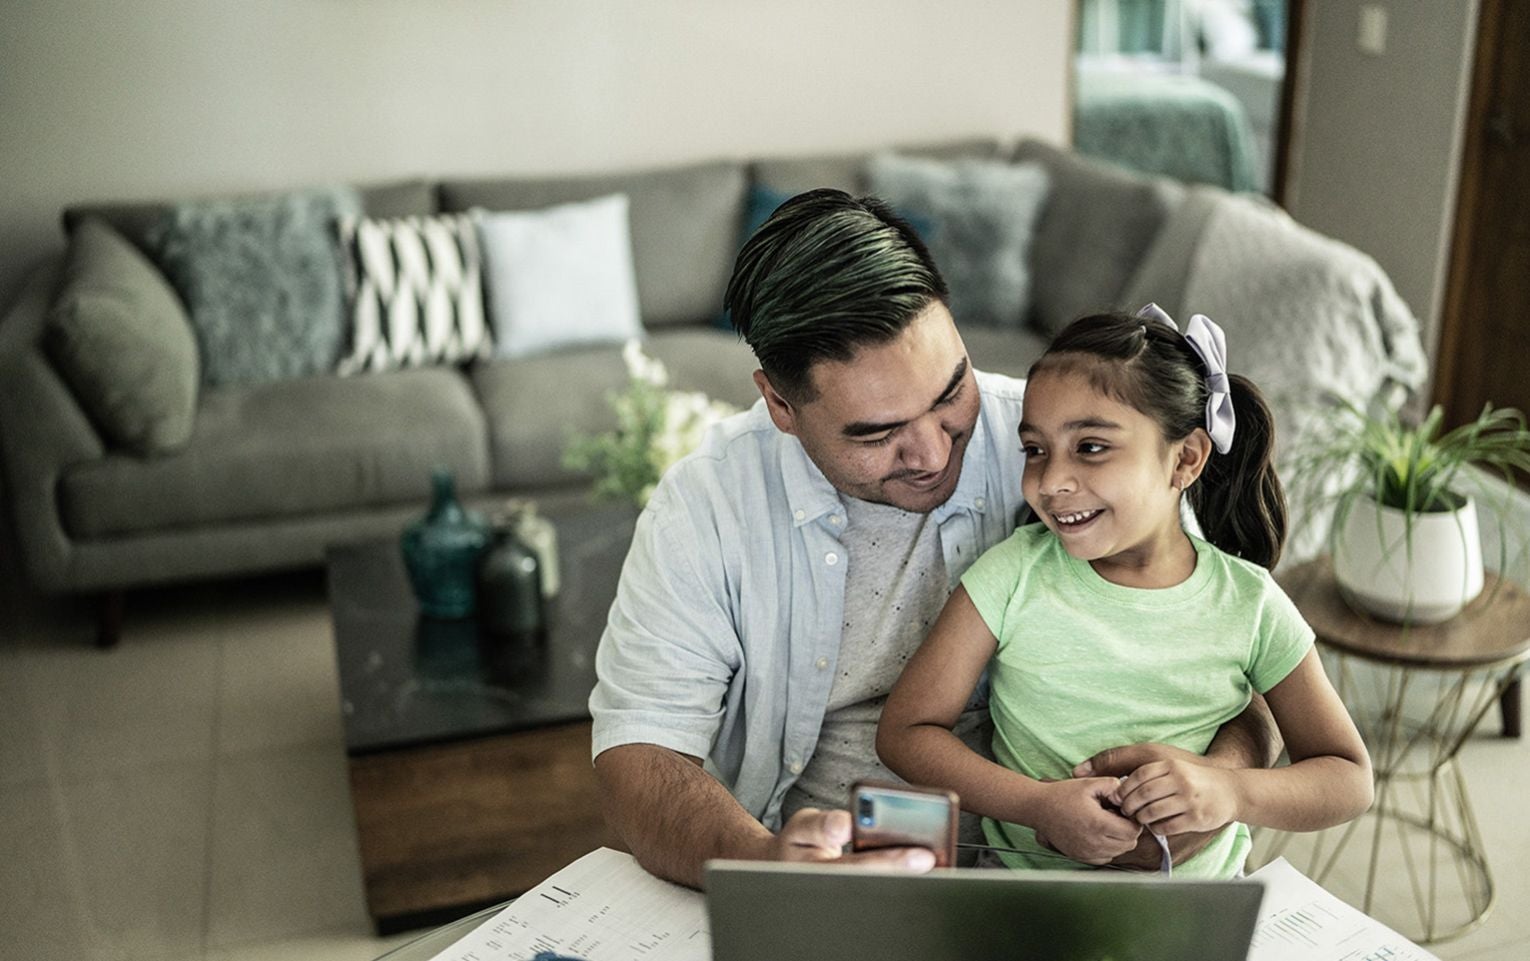 Dad on laptop with daughter